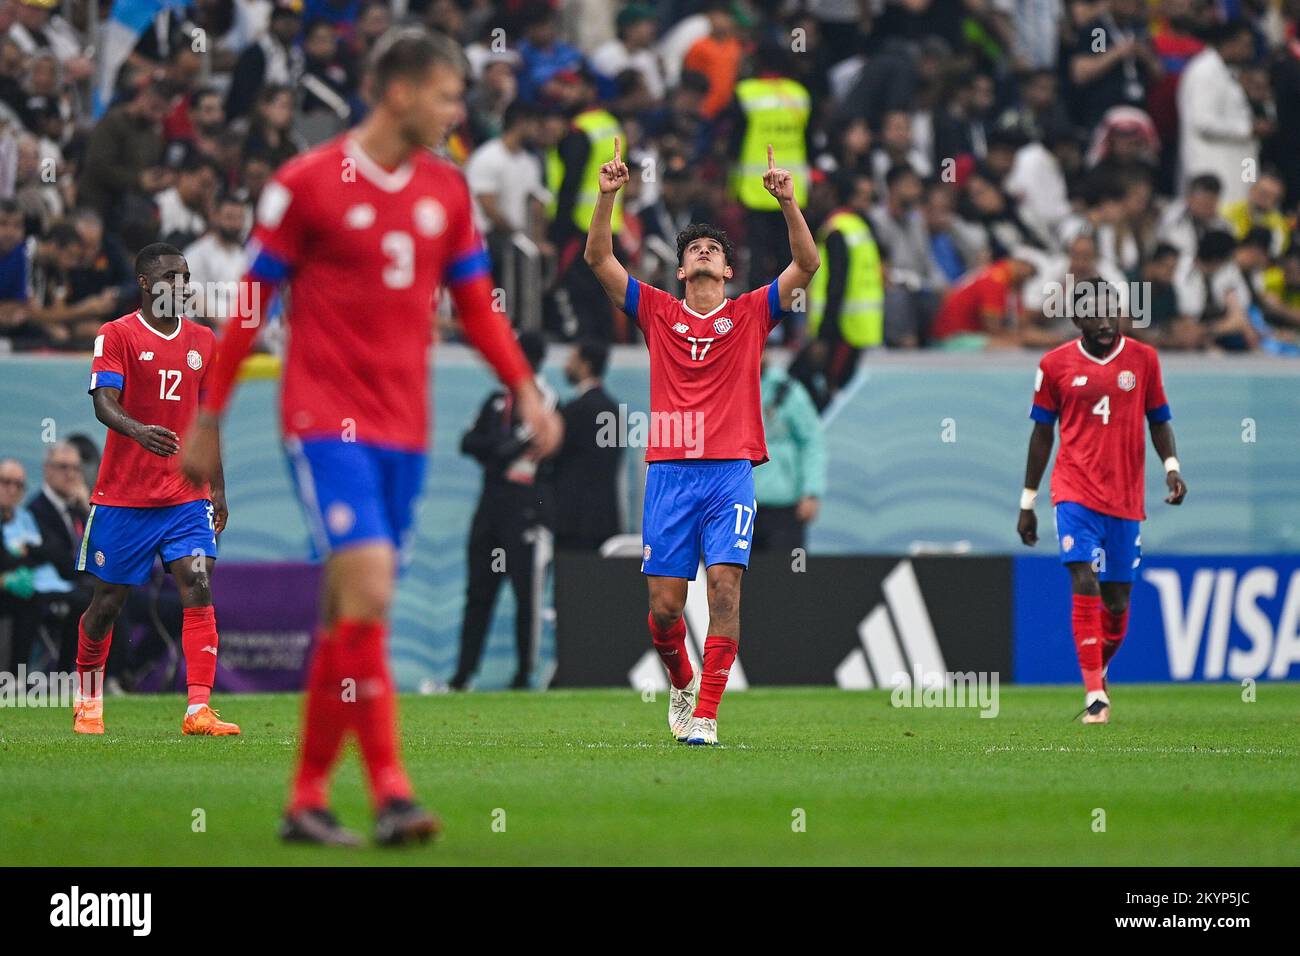 AL KHOR, QATAR - DECEMBER 1: Yeltsin Tejeda of Costa Rica celebrates after scoring his sides first goal during the Group E - FIFA World Cup Qatar 2022 match between Costa Rica and Germany at the Al Bayt Stadium on December 1, 2022 in Al Khor, Qatar (Photo by Pablo Morano/BSR Agency) Stock Photo